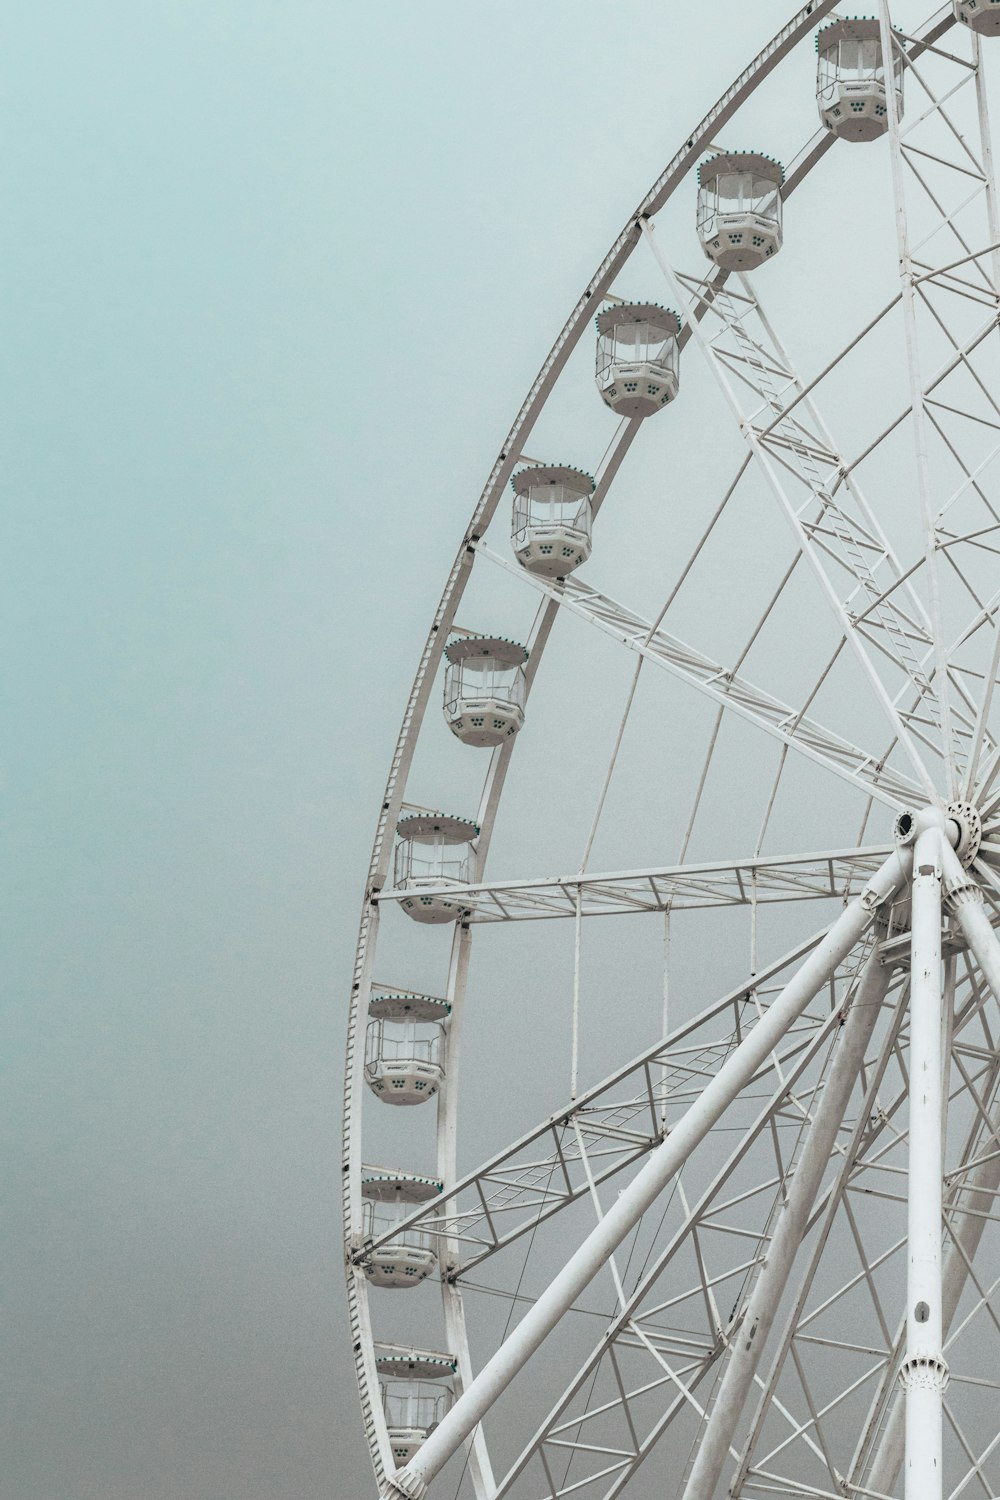 a ferris wheel in the middle of a cloudy sky